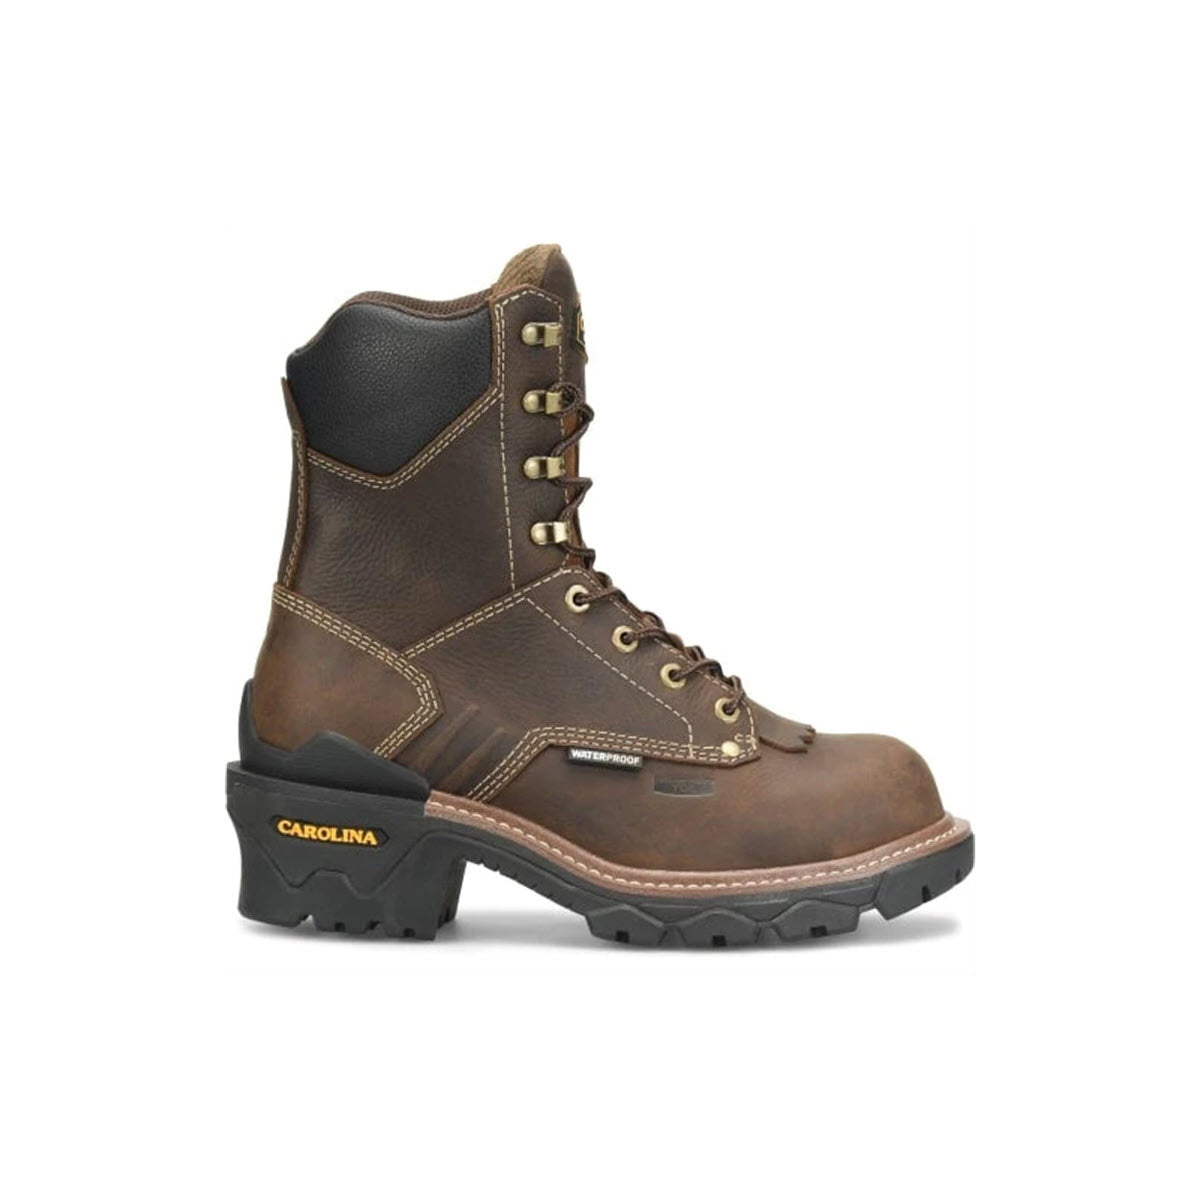 A single Carolina COMP TOE 8 INCH CAPACITY waterproof logger work boot with laces, isolated on a white background.